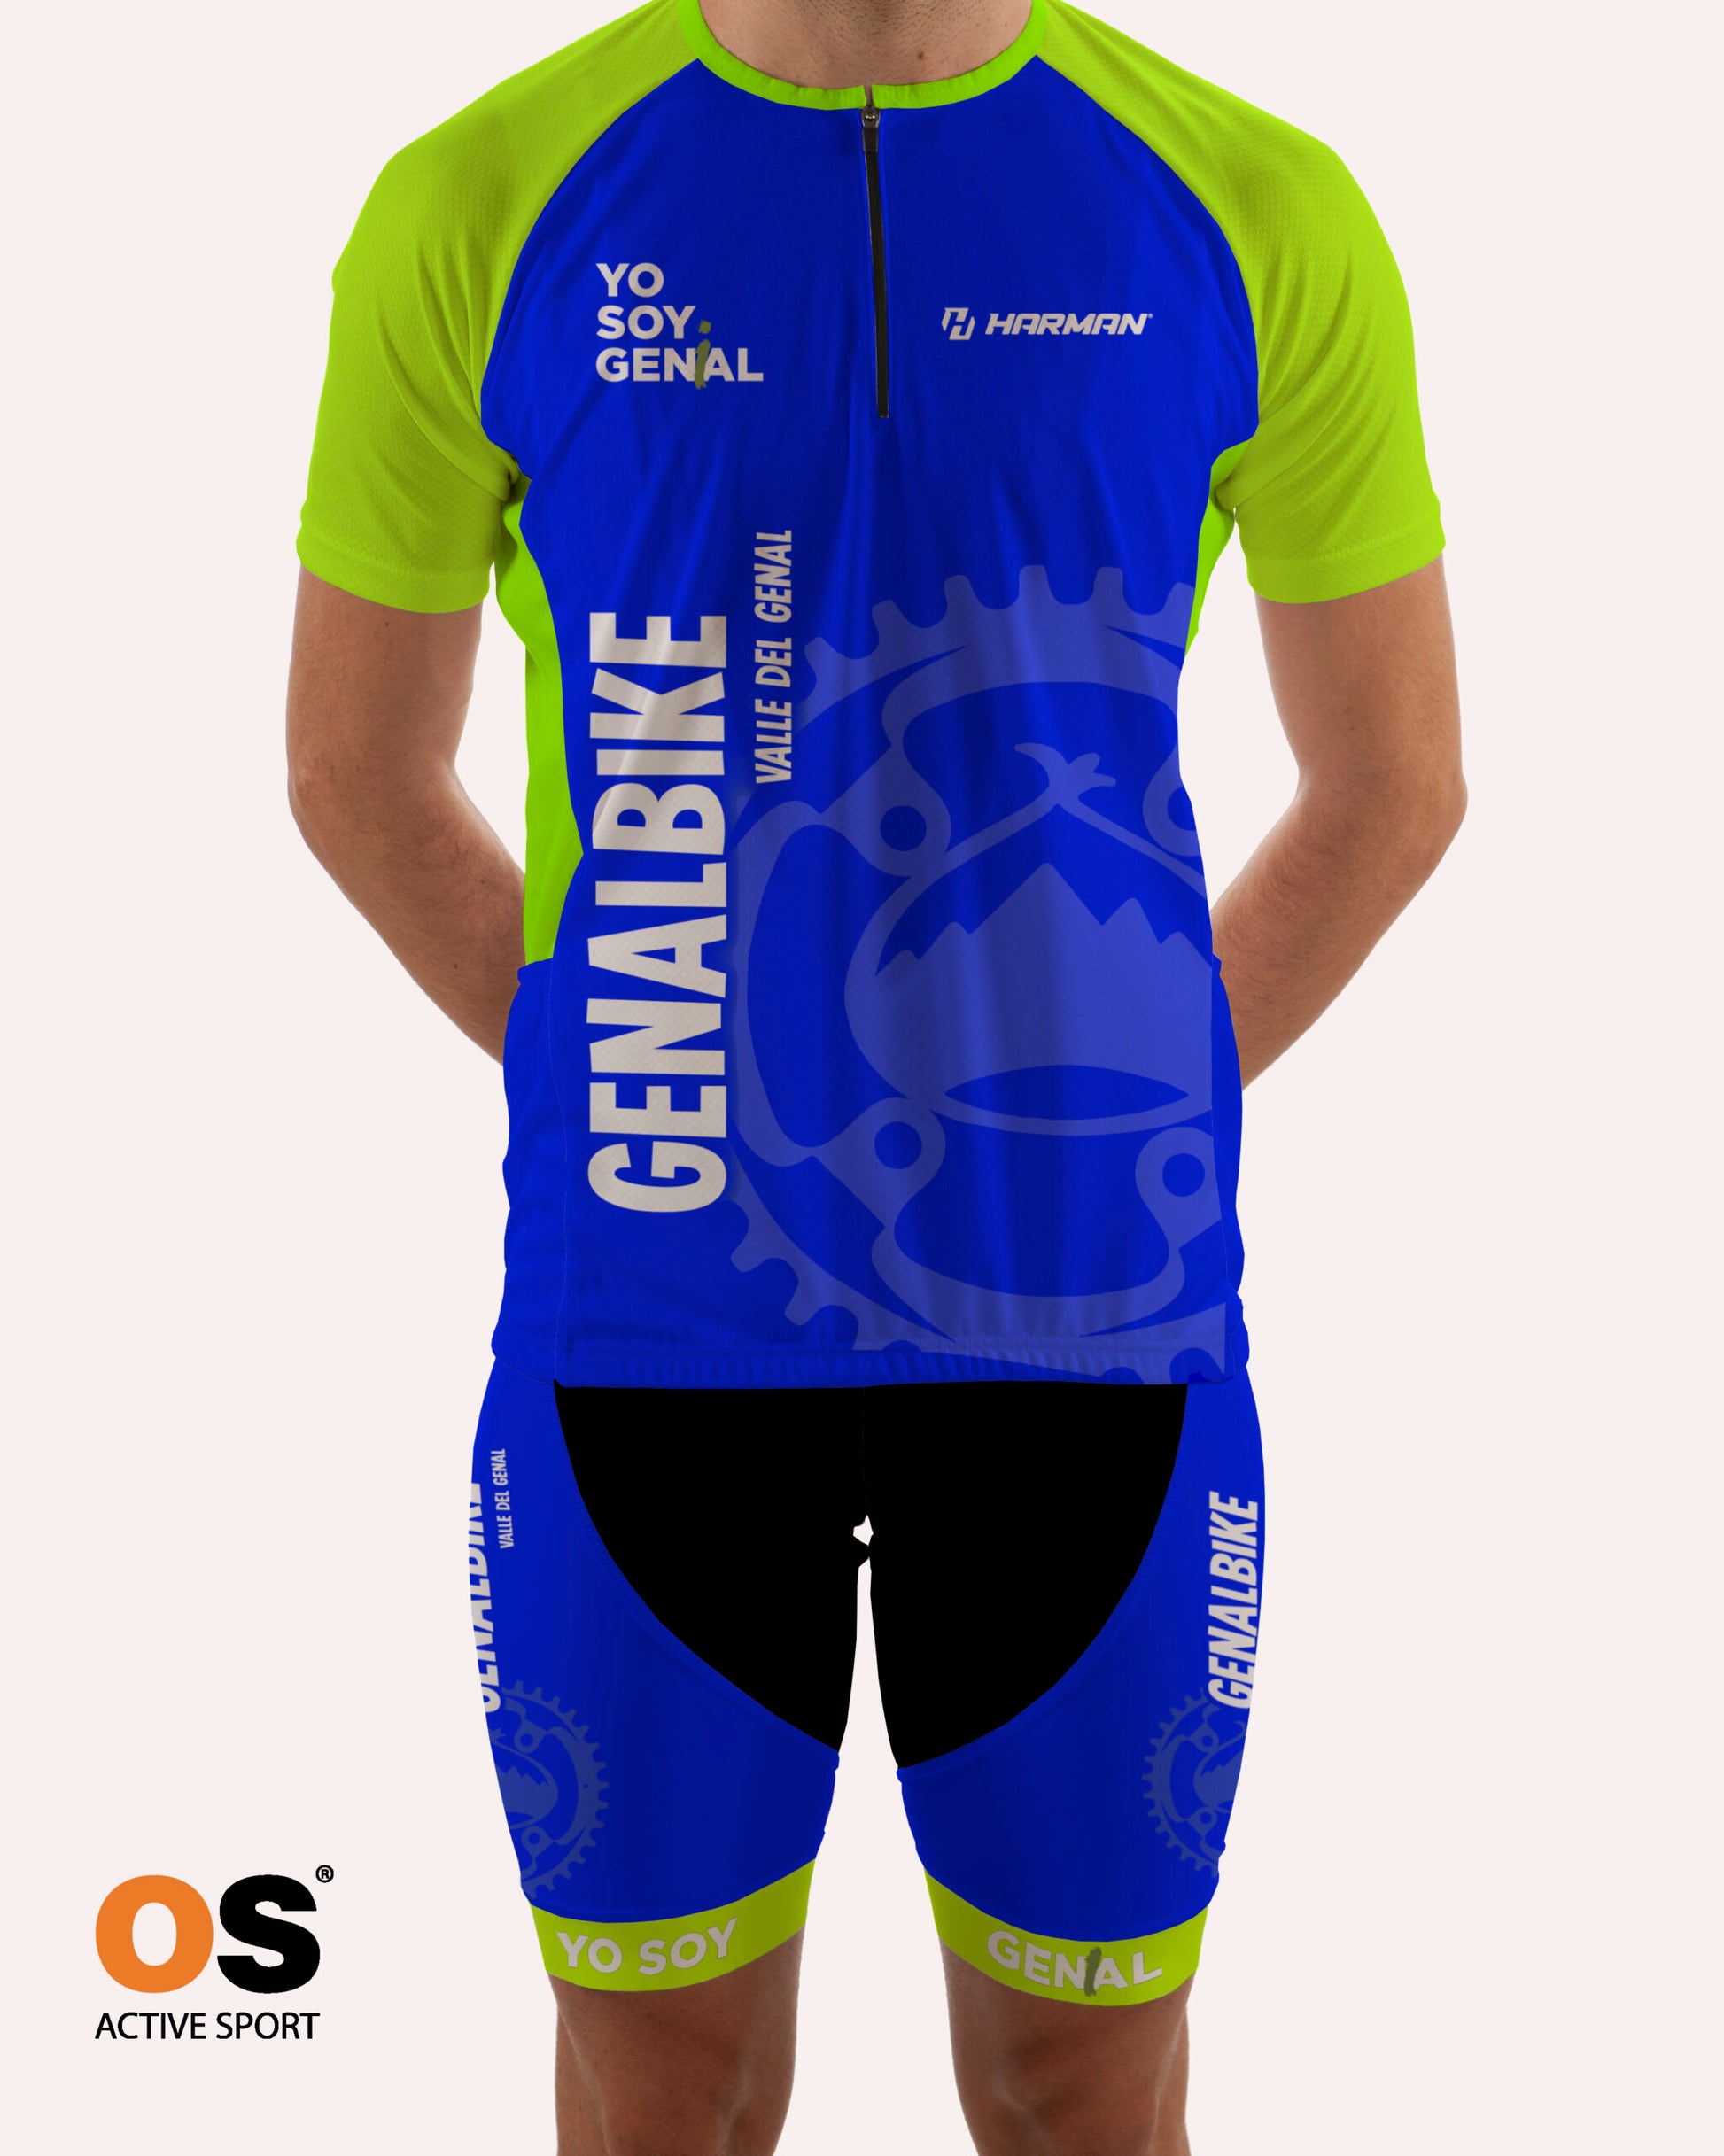 Maillot ciclismo Genal Bike – OS Active Sport